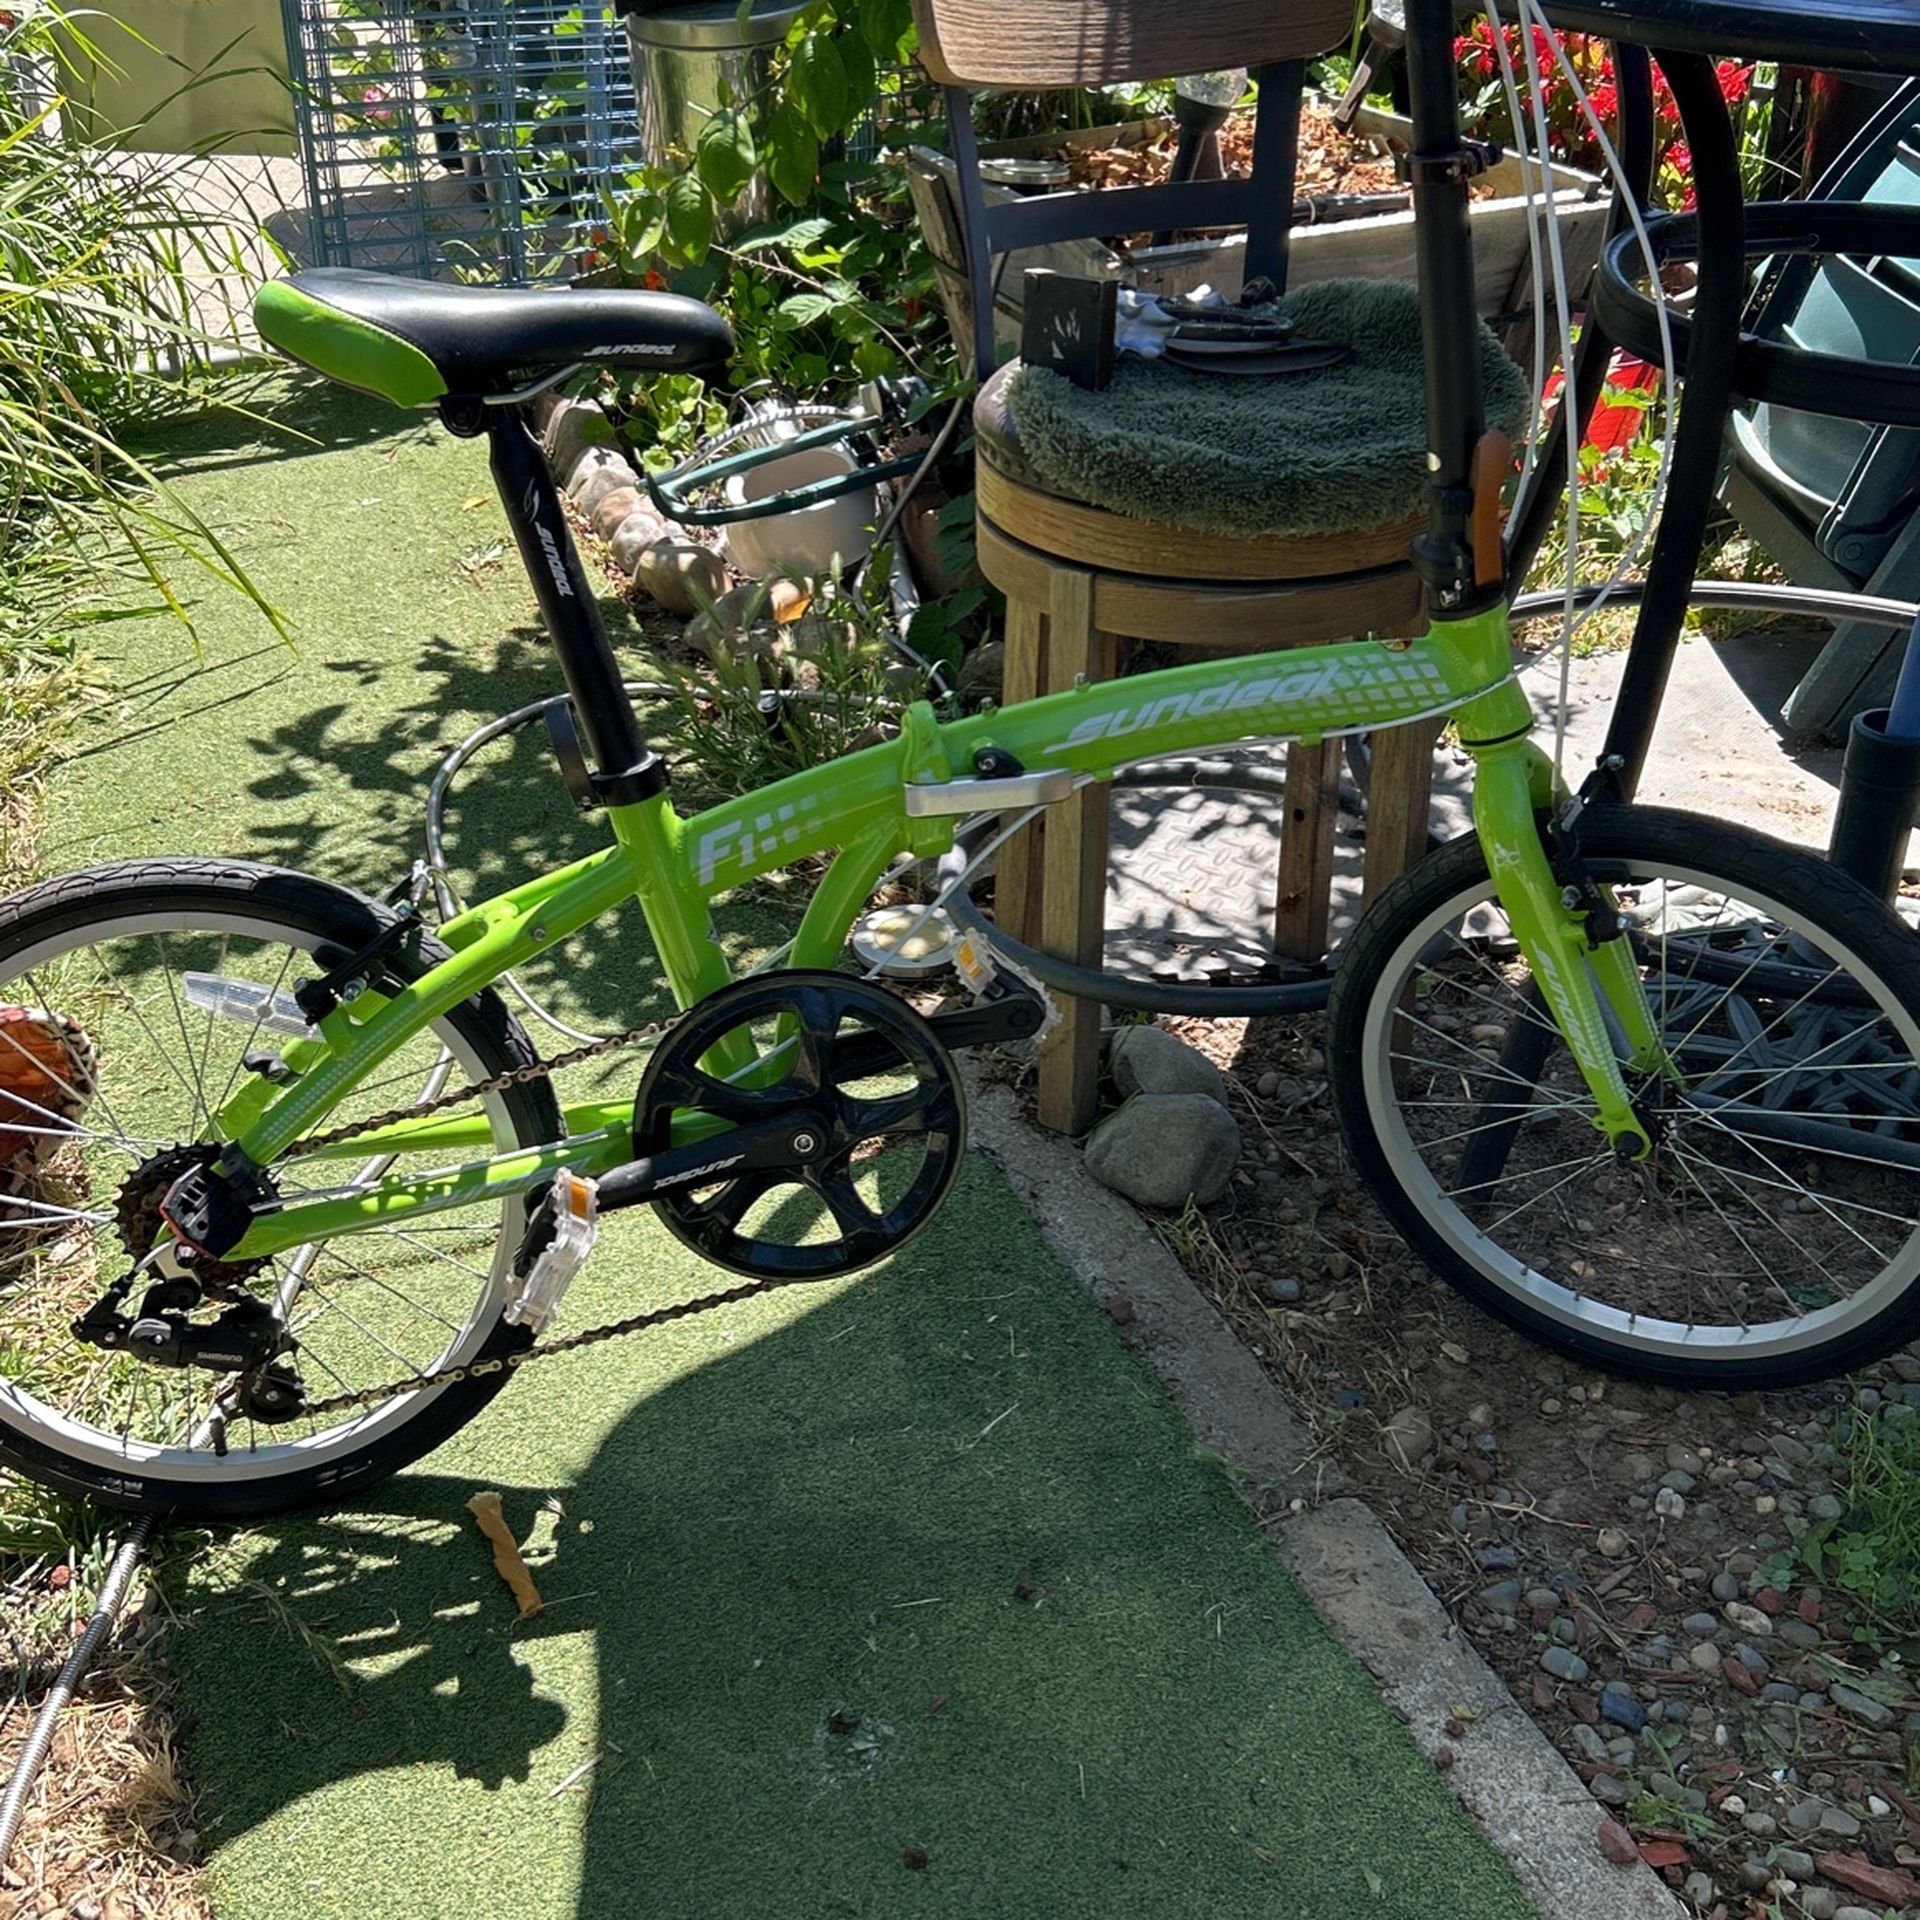 FOLDUP BIKE- F1 SUNDEAL, 7 Gears, Bright Green, In Good Condition Adjustable To Any Size (adults and Teens)